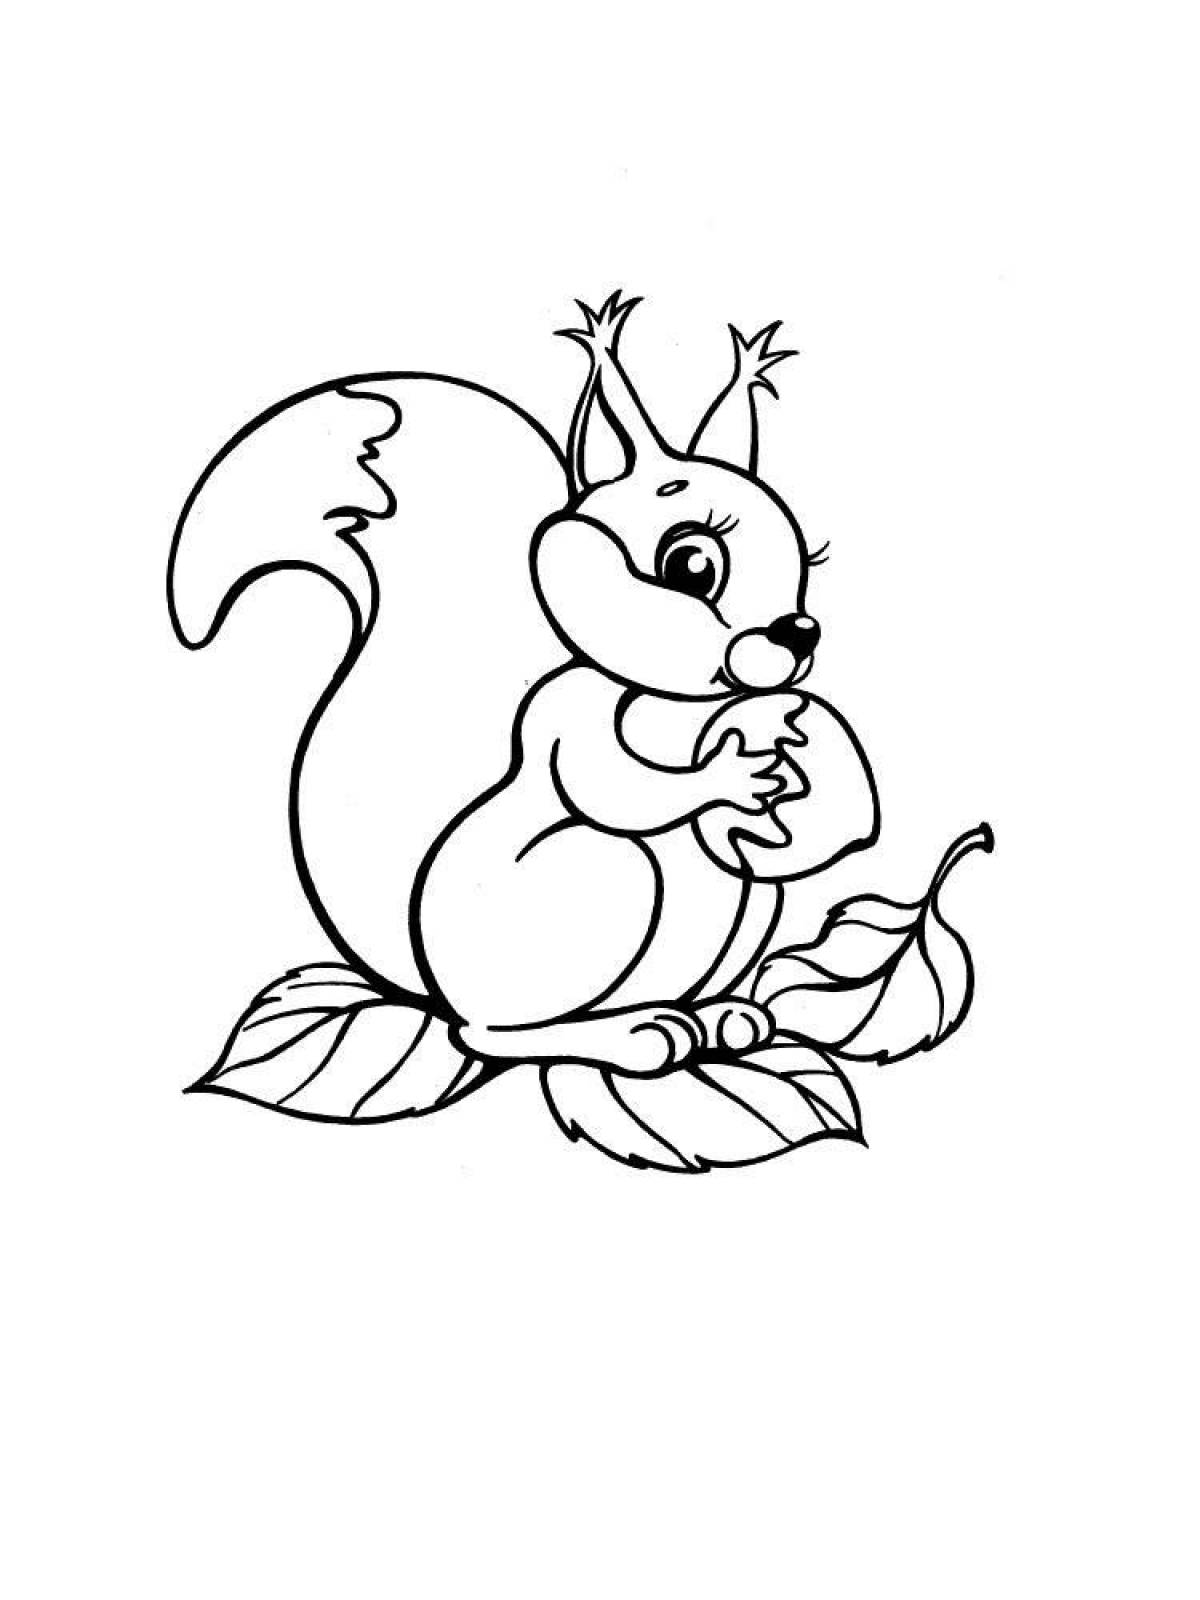 Silly squirrel coloring book for kids